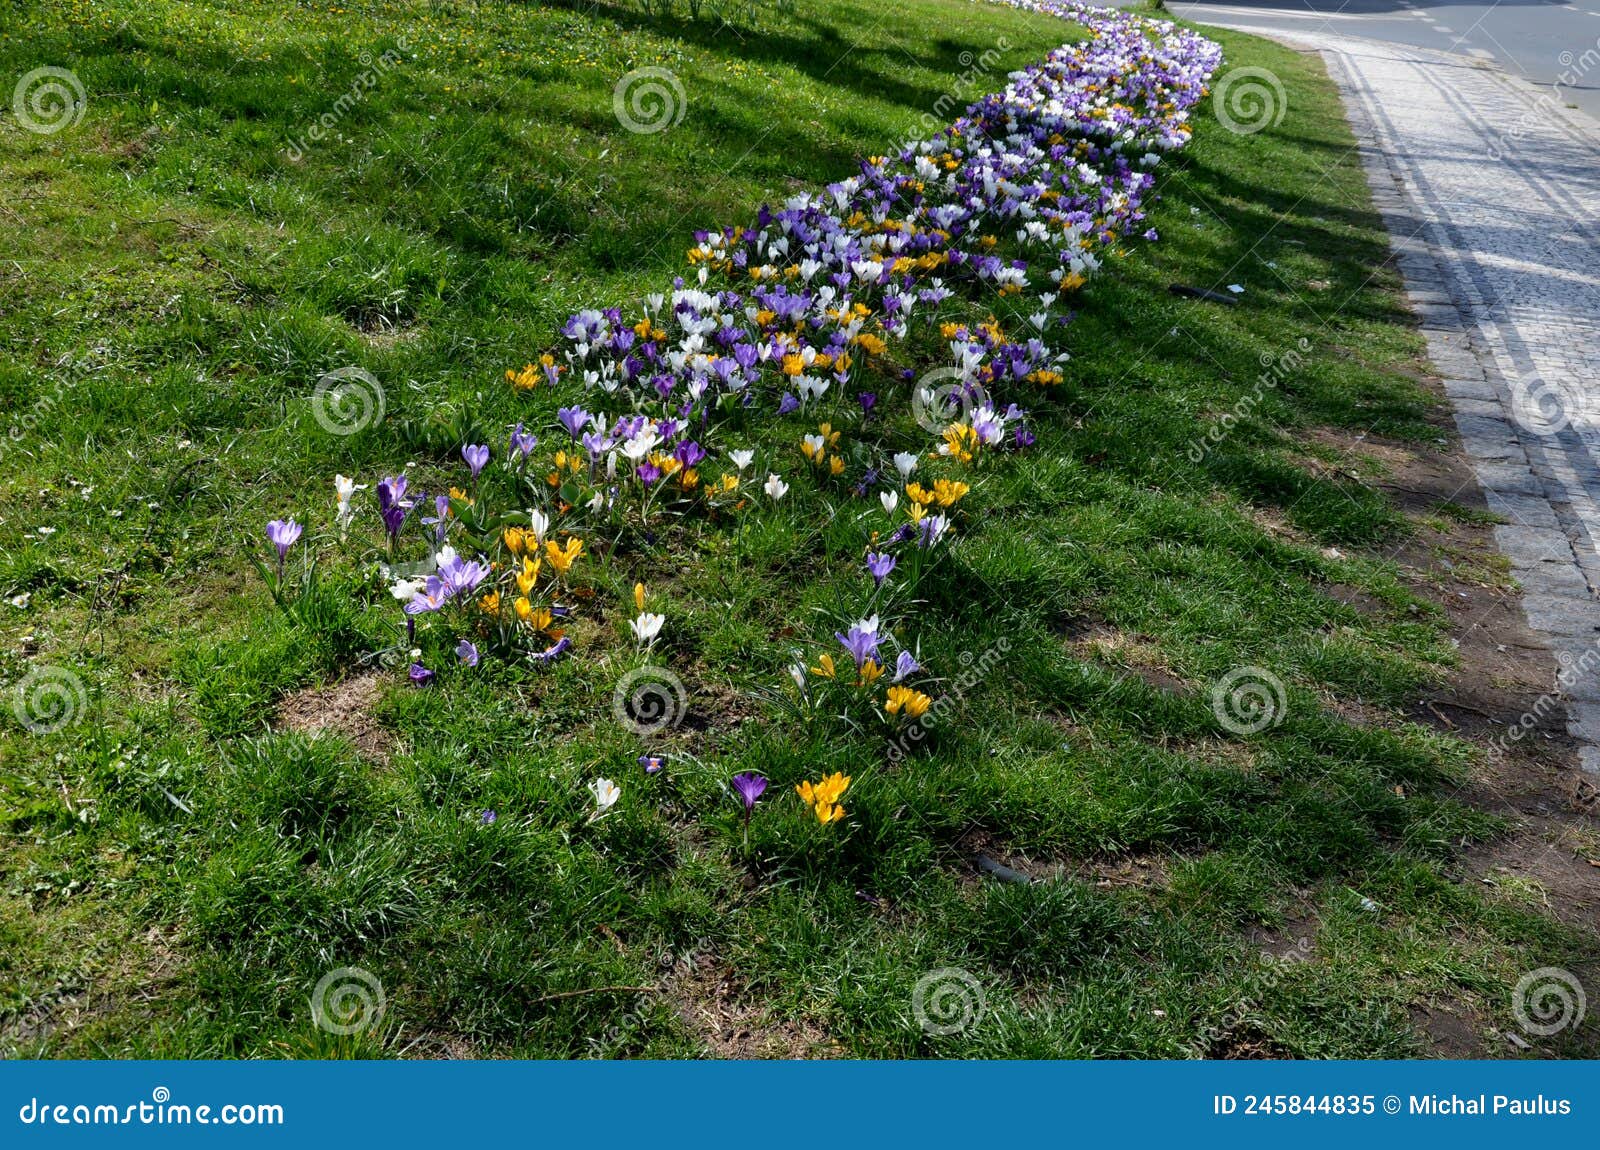 purple bulbs bloom in the grassy strip between the lanes in the city. crocuses in a dense carpet. highway beauty with horticultura